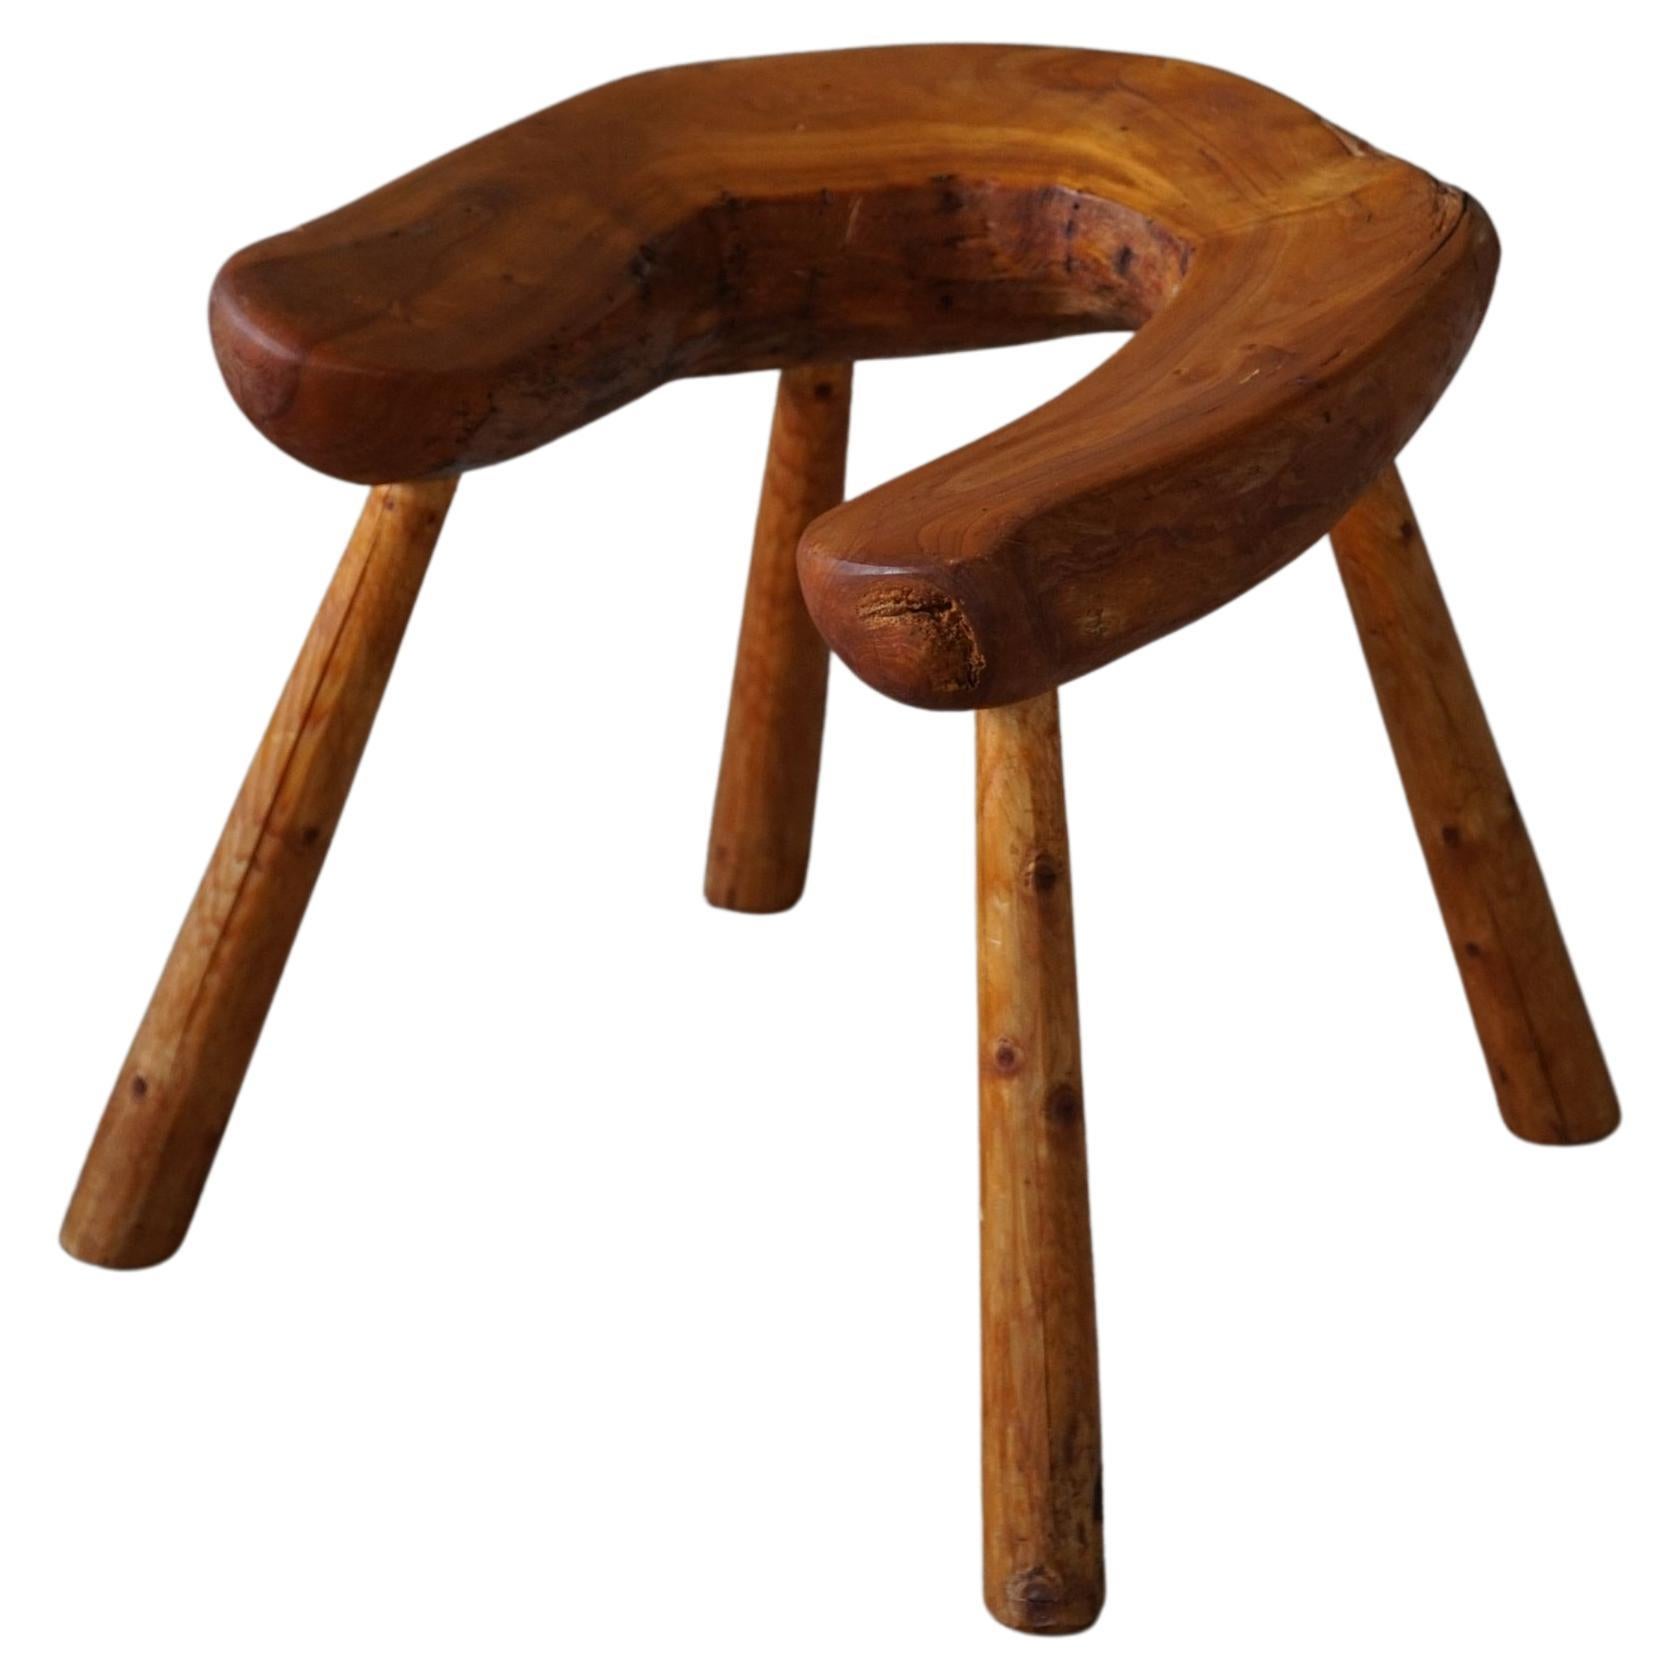 Wabi Sabi Stool in Solid Pine, Handcrafted by a Swedish Cabinetmaker, 1950s